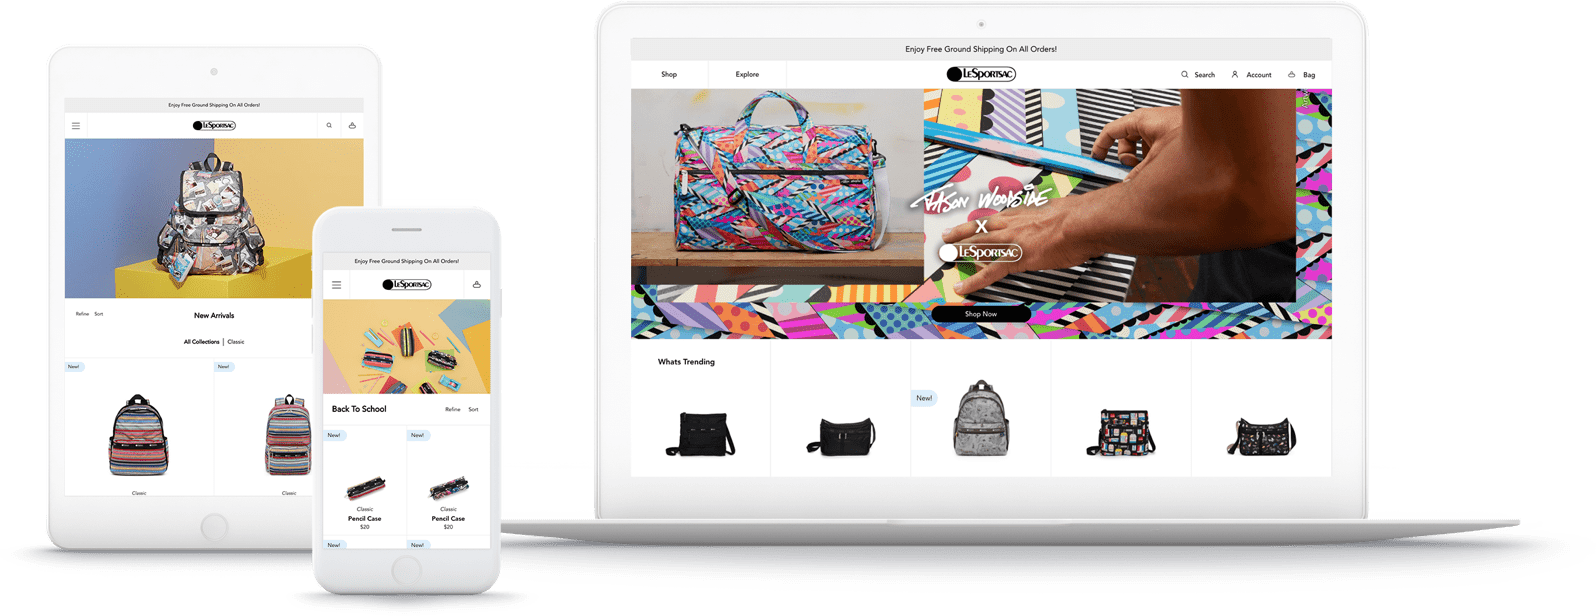 LeSportsac’s responsive online store on Shopify Plus